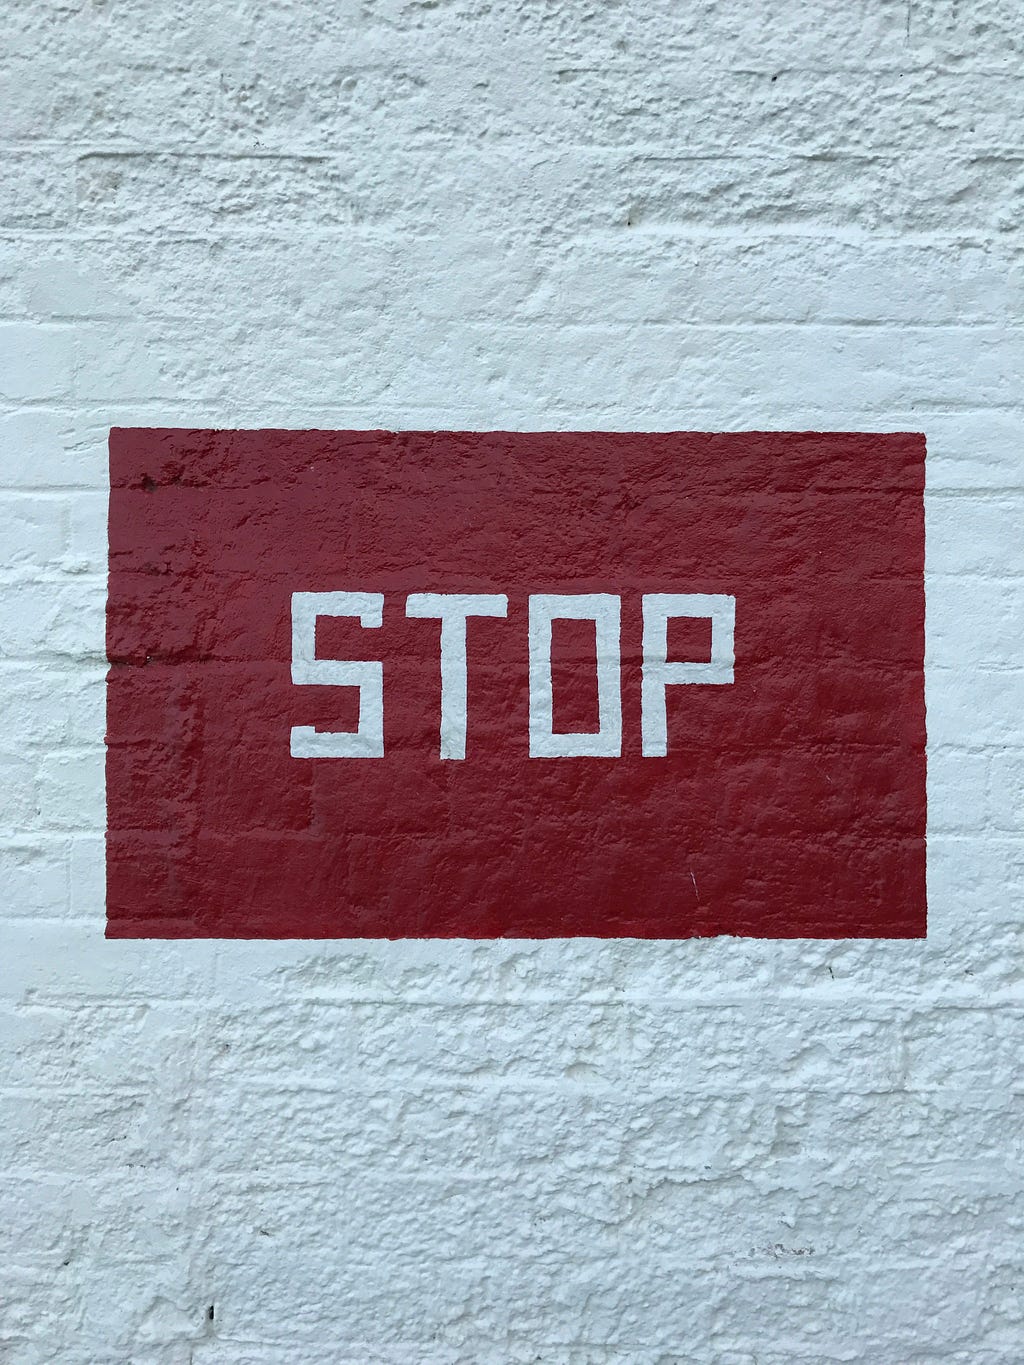 painted stop sign on a white brick wall